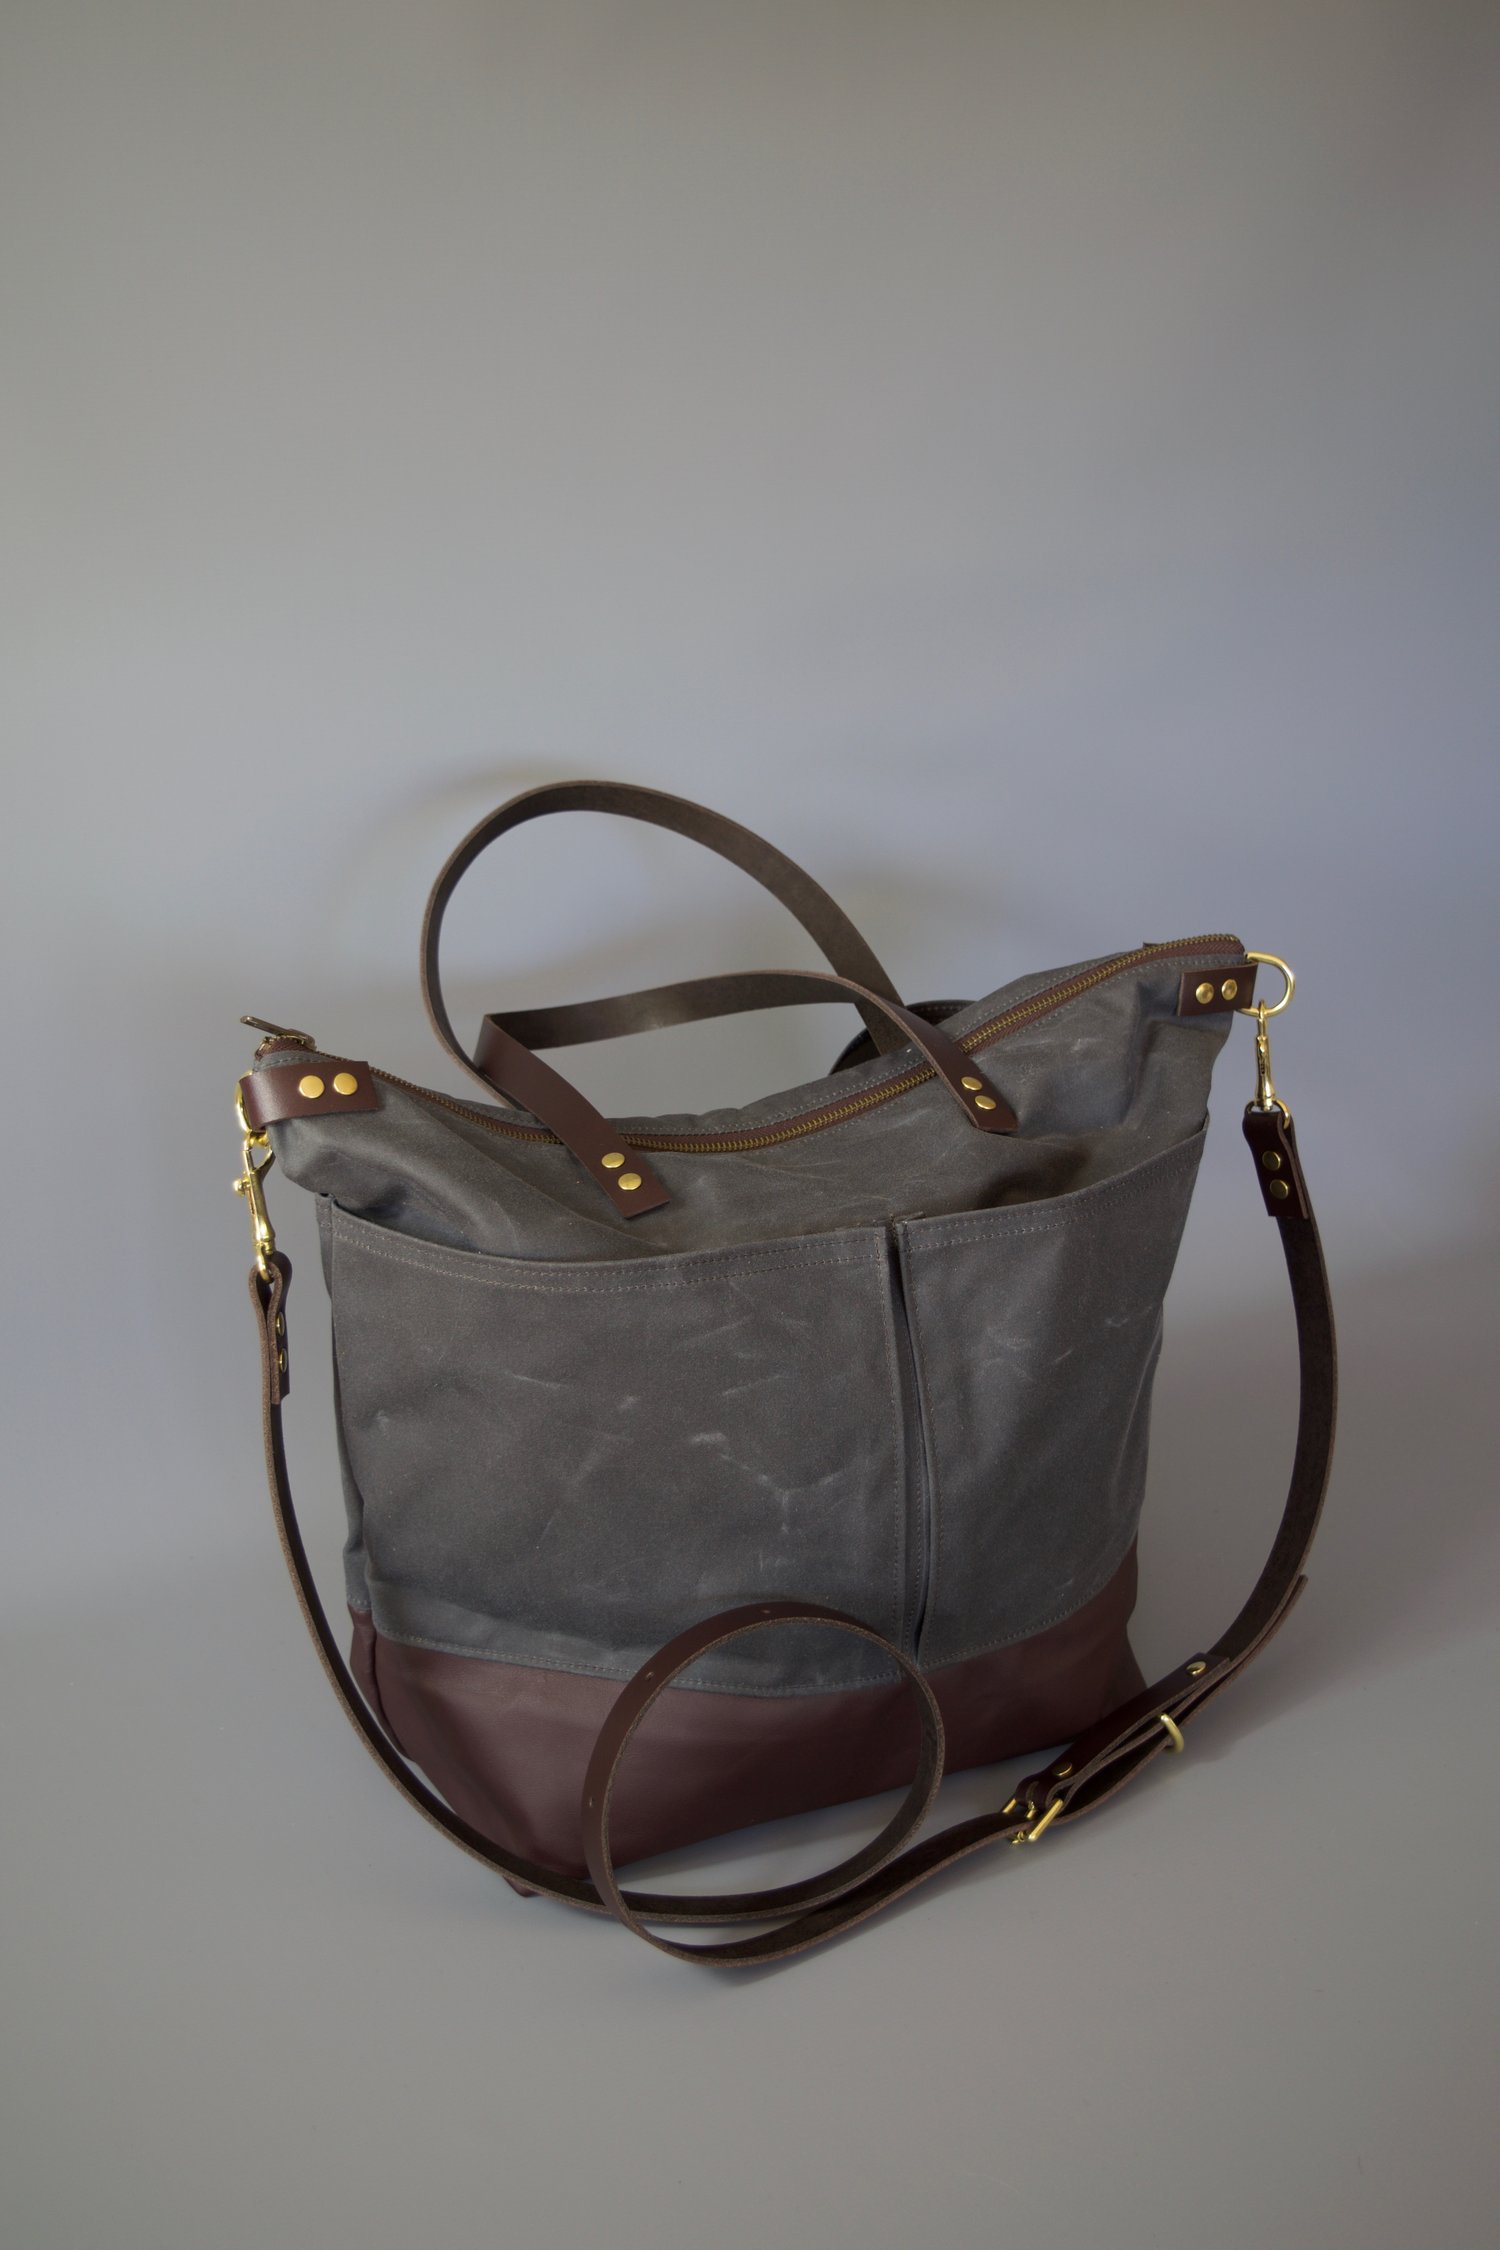 Large Tote Bag Grey Leather Louis